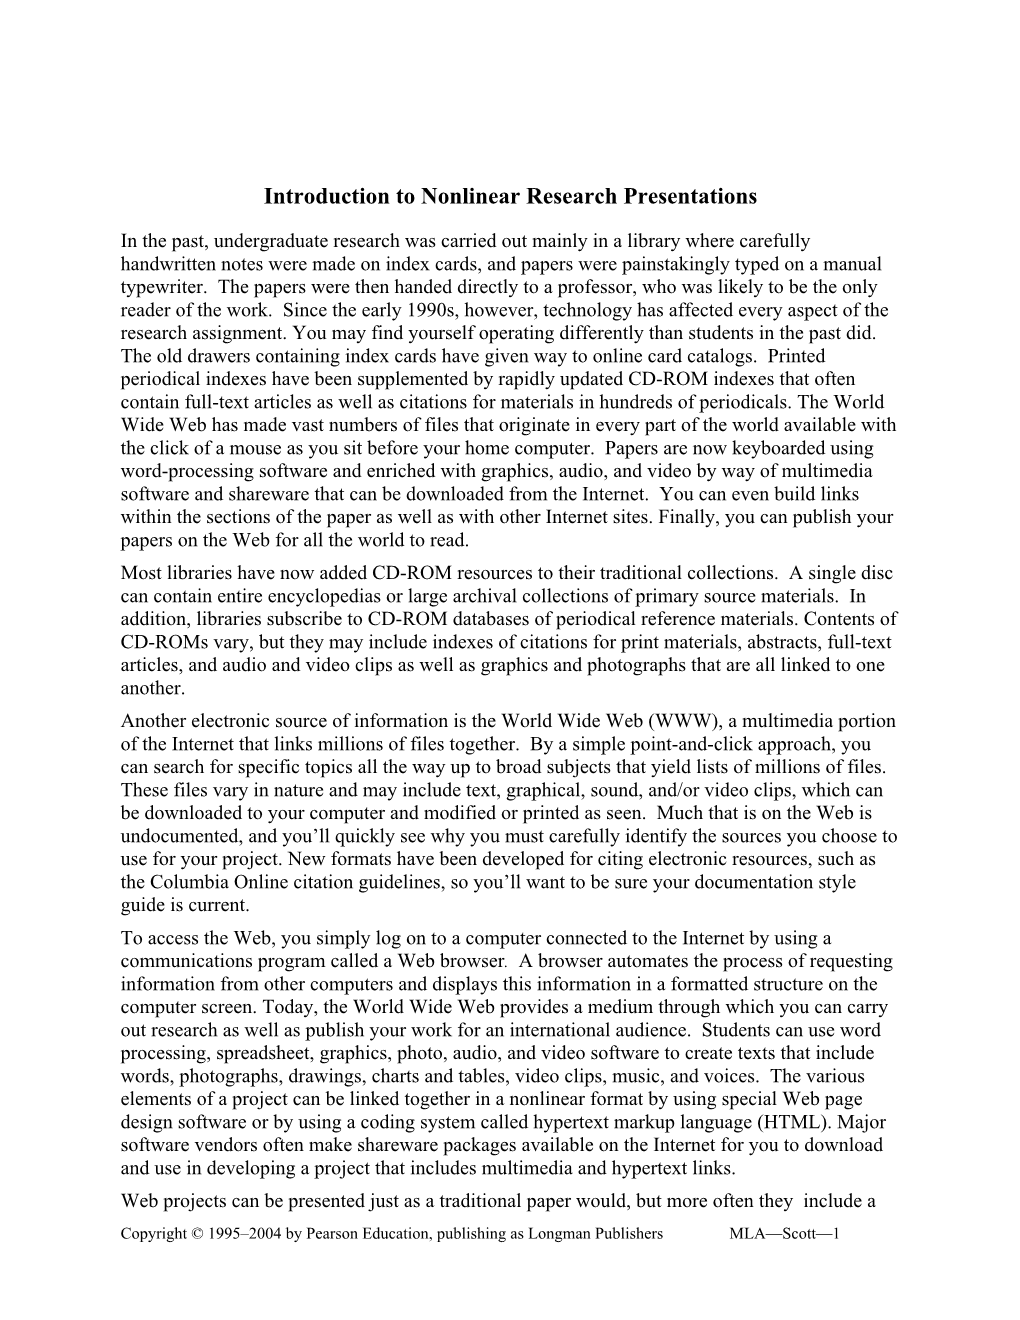 Introduction to Nonlinear Research Presentations